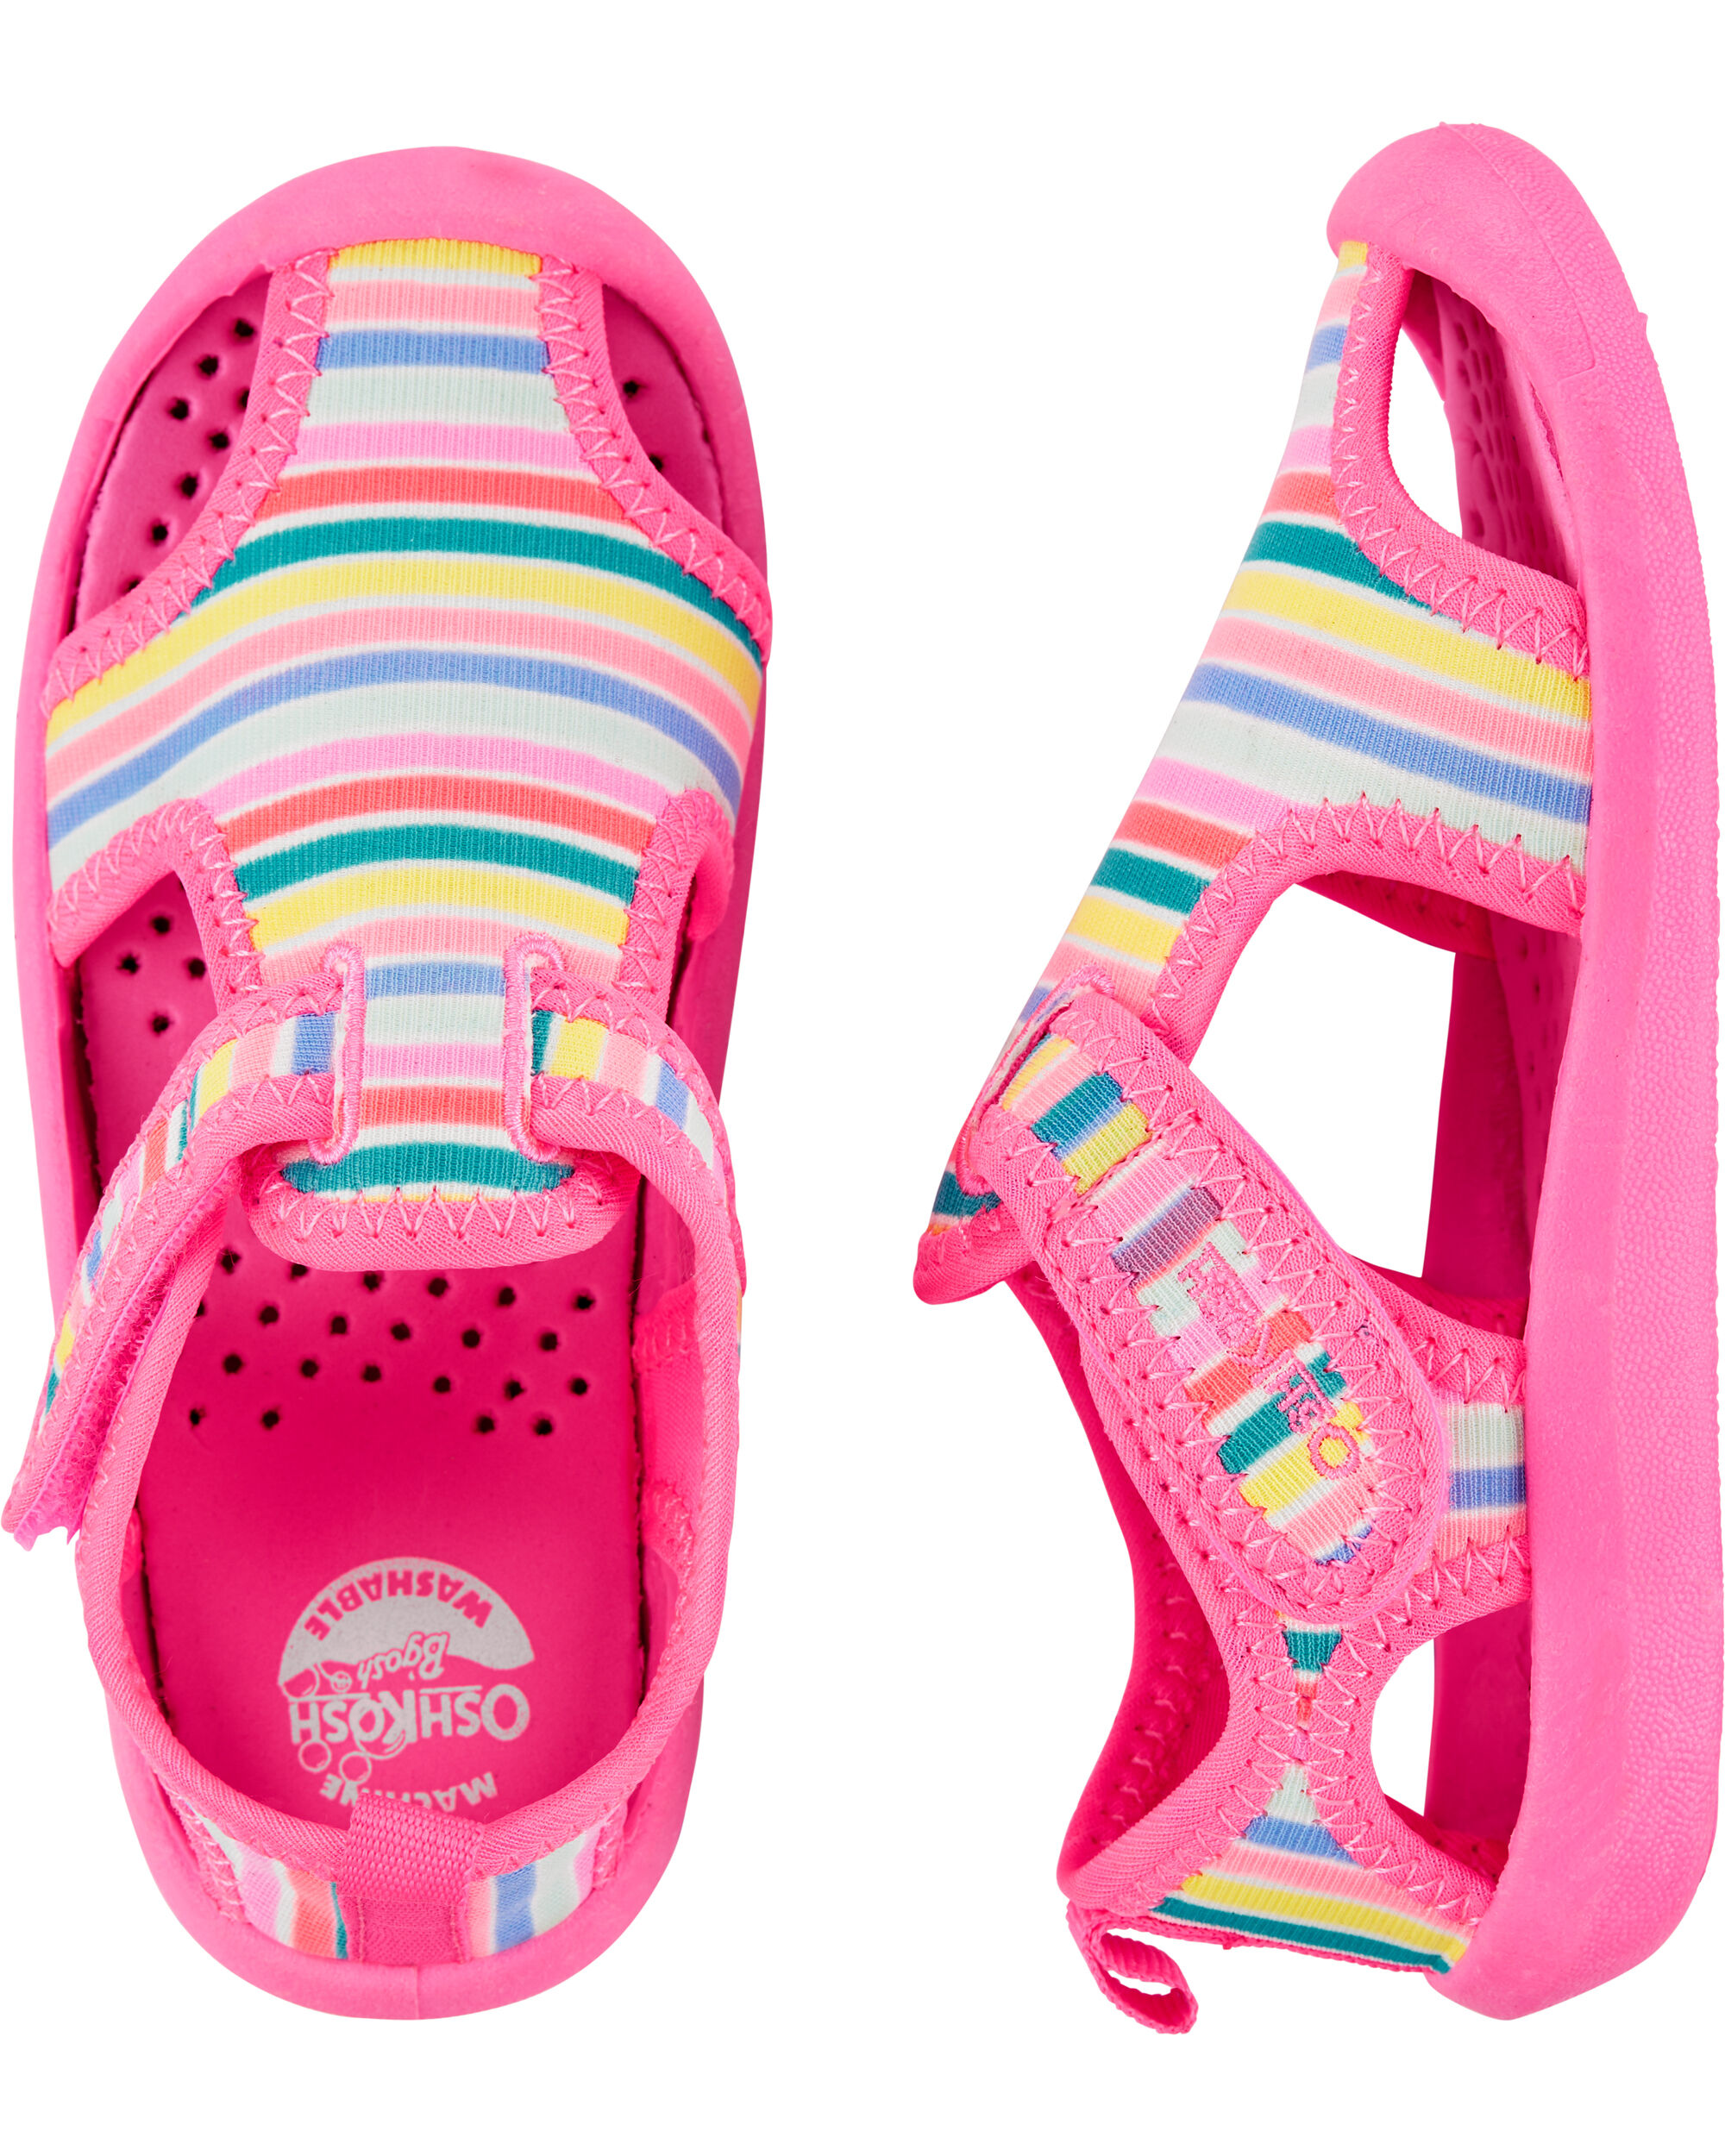 baby water shoes canada